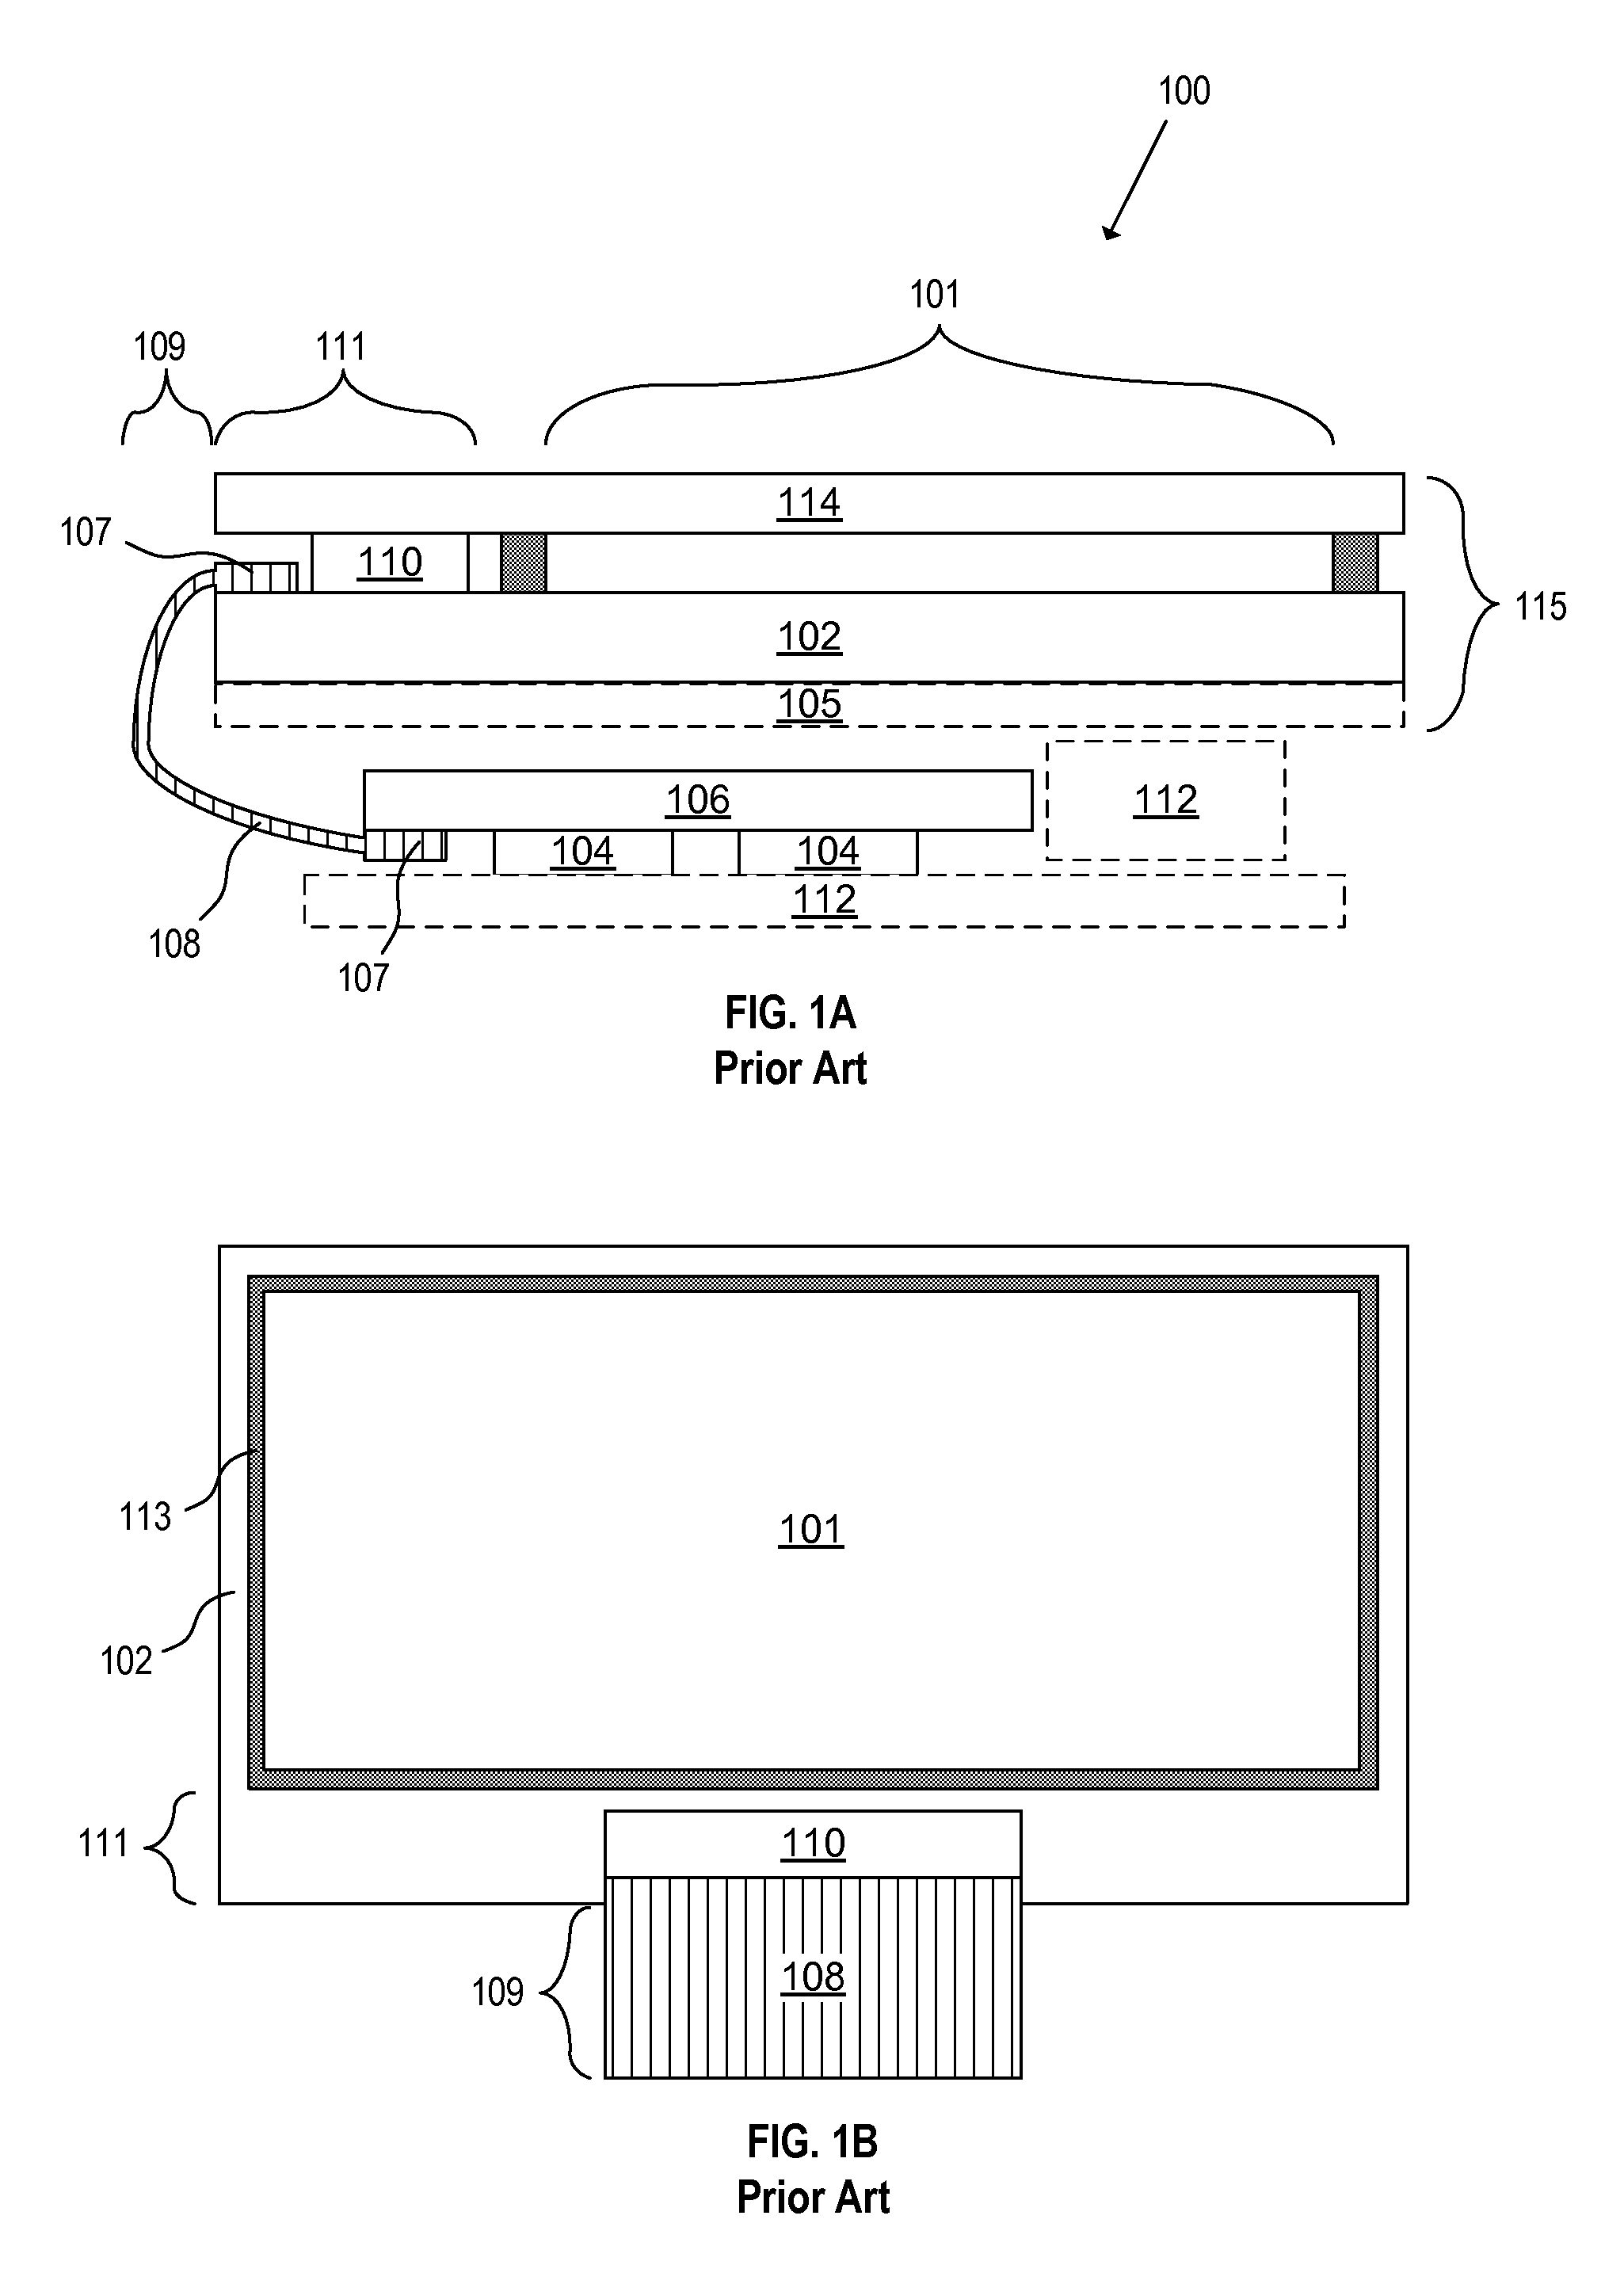 Display module and system applications